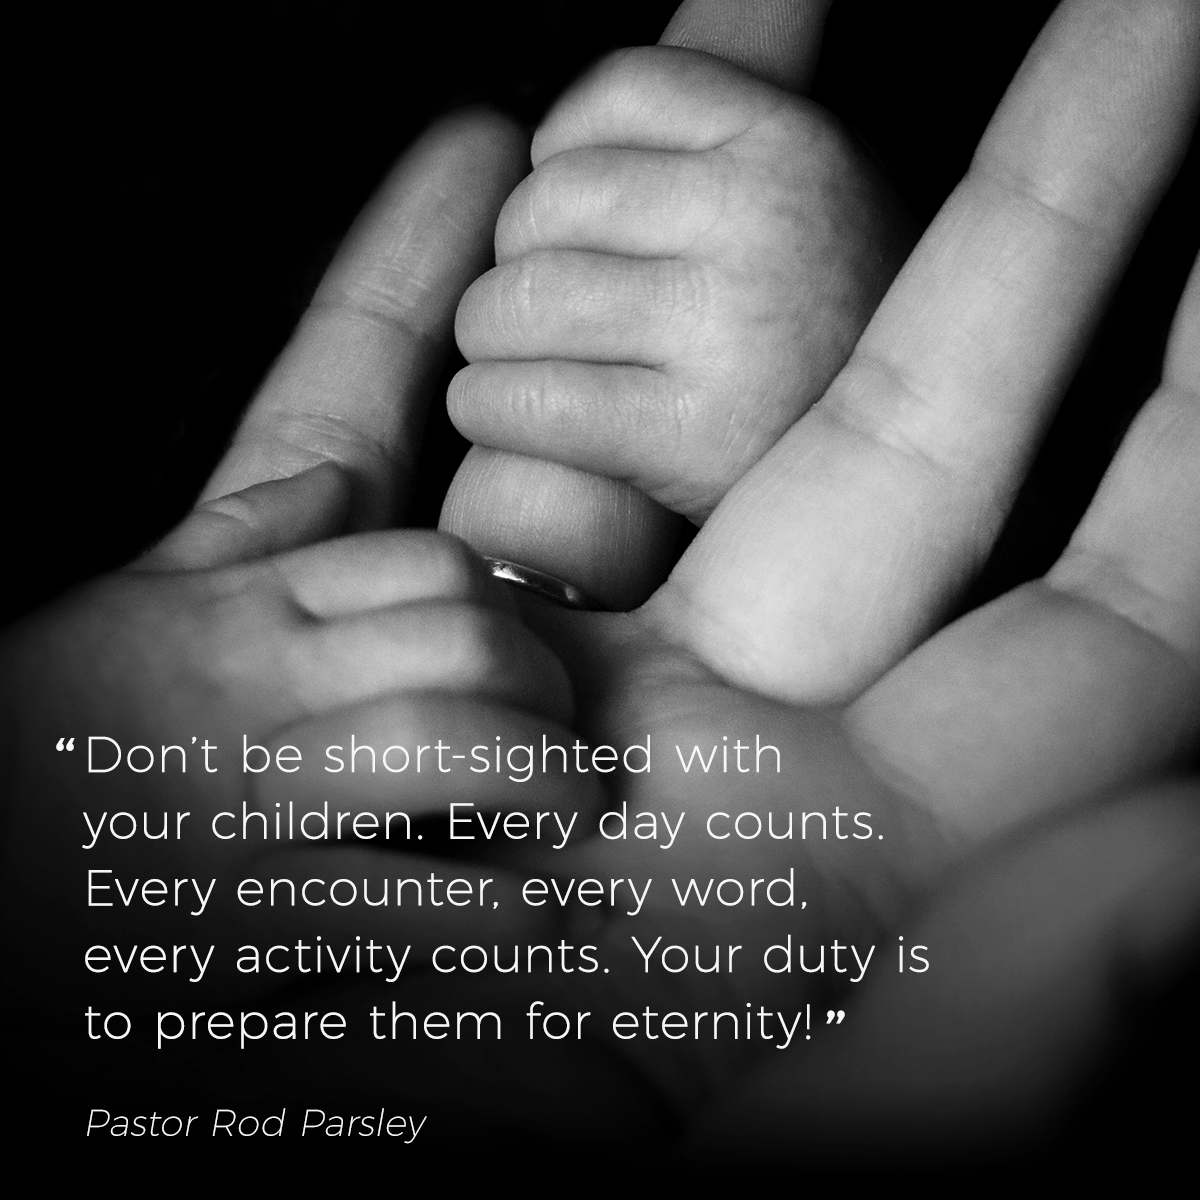 “Don’t be short-sighted with your children. Every day counts. Every encounter, every word, every activity counts. Your duty is to prepare them for eternity!” – Pastor Rod Parsley